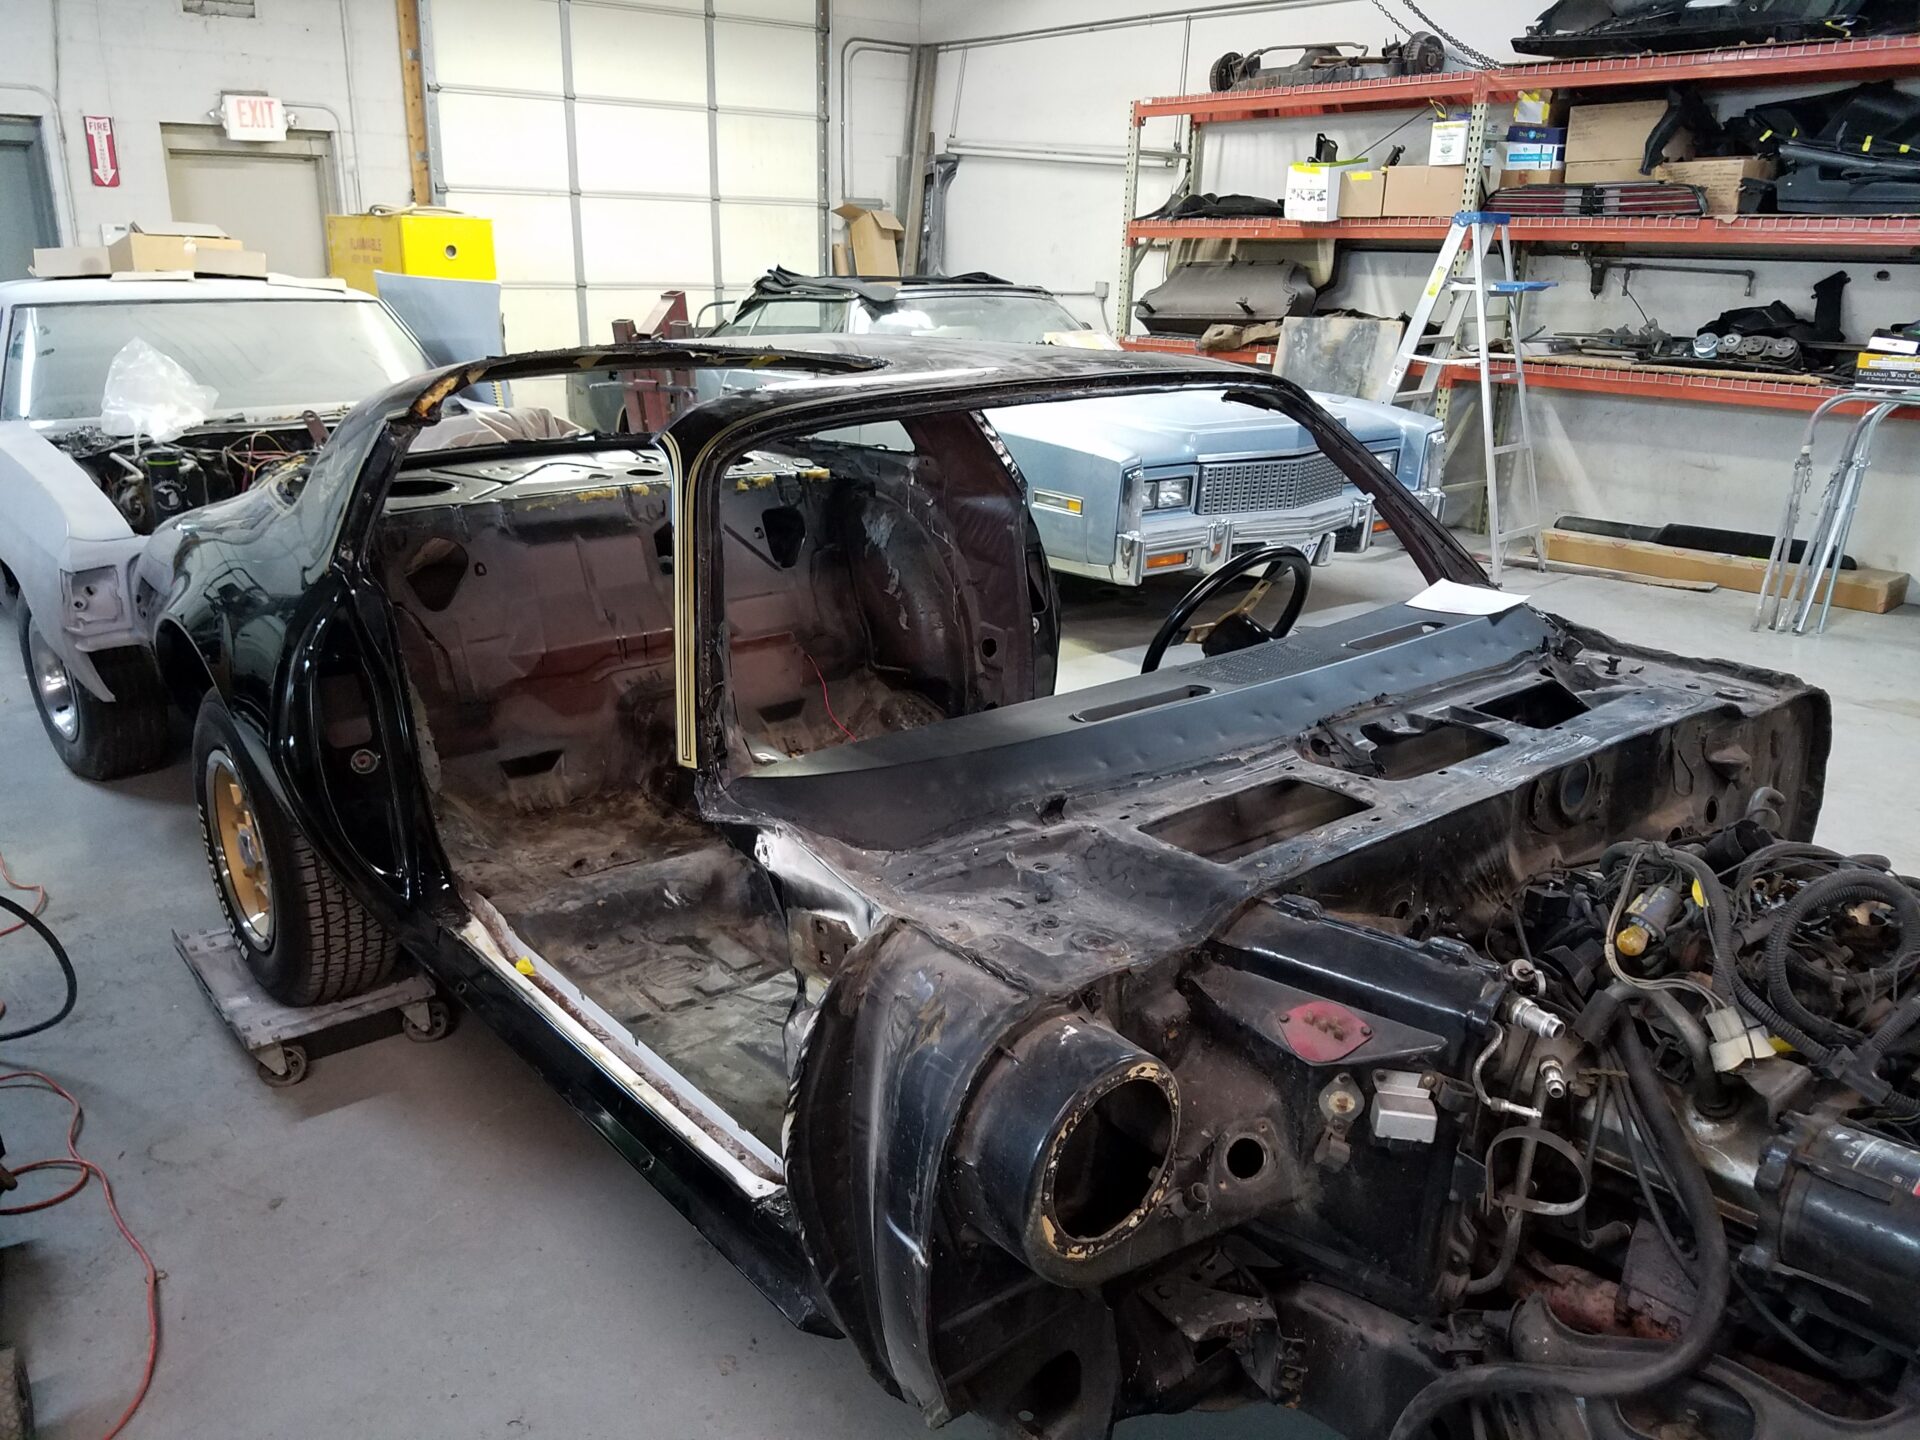 Parts of the 1976 Pontiac Trans Am S/E removed